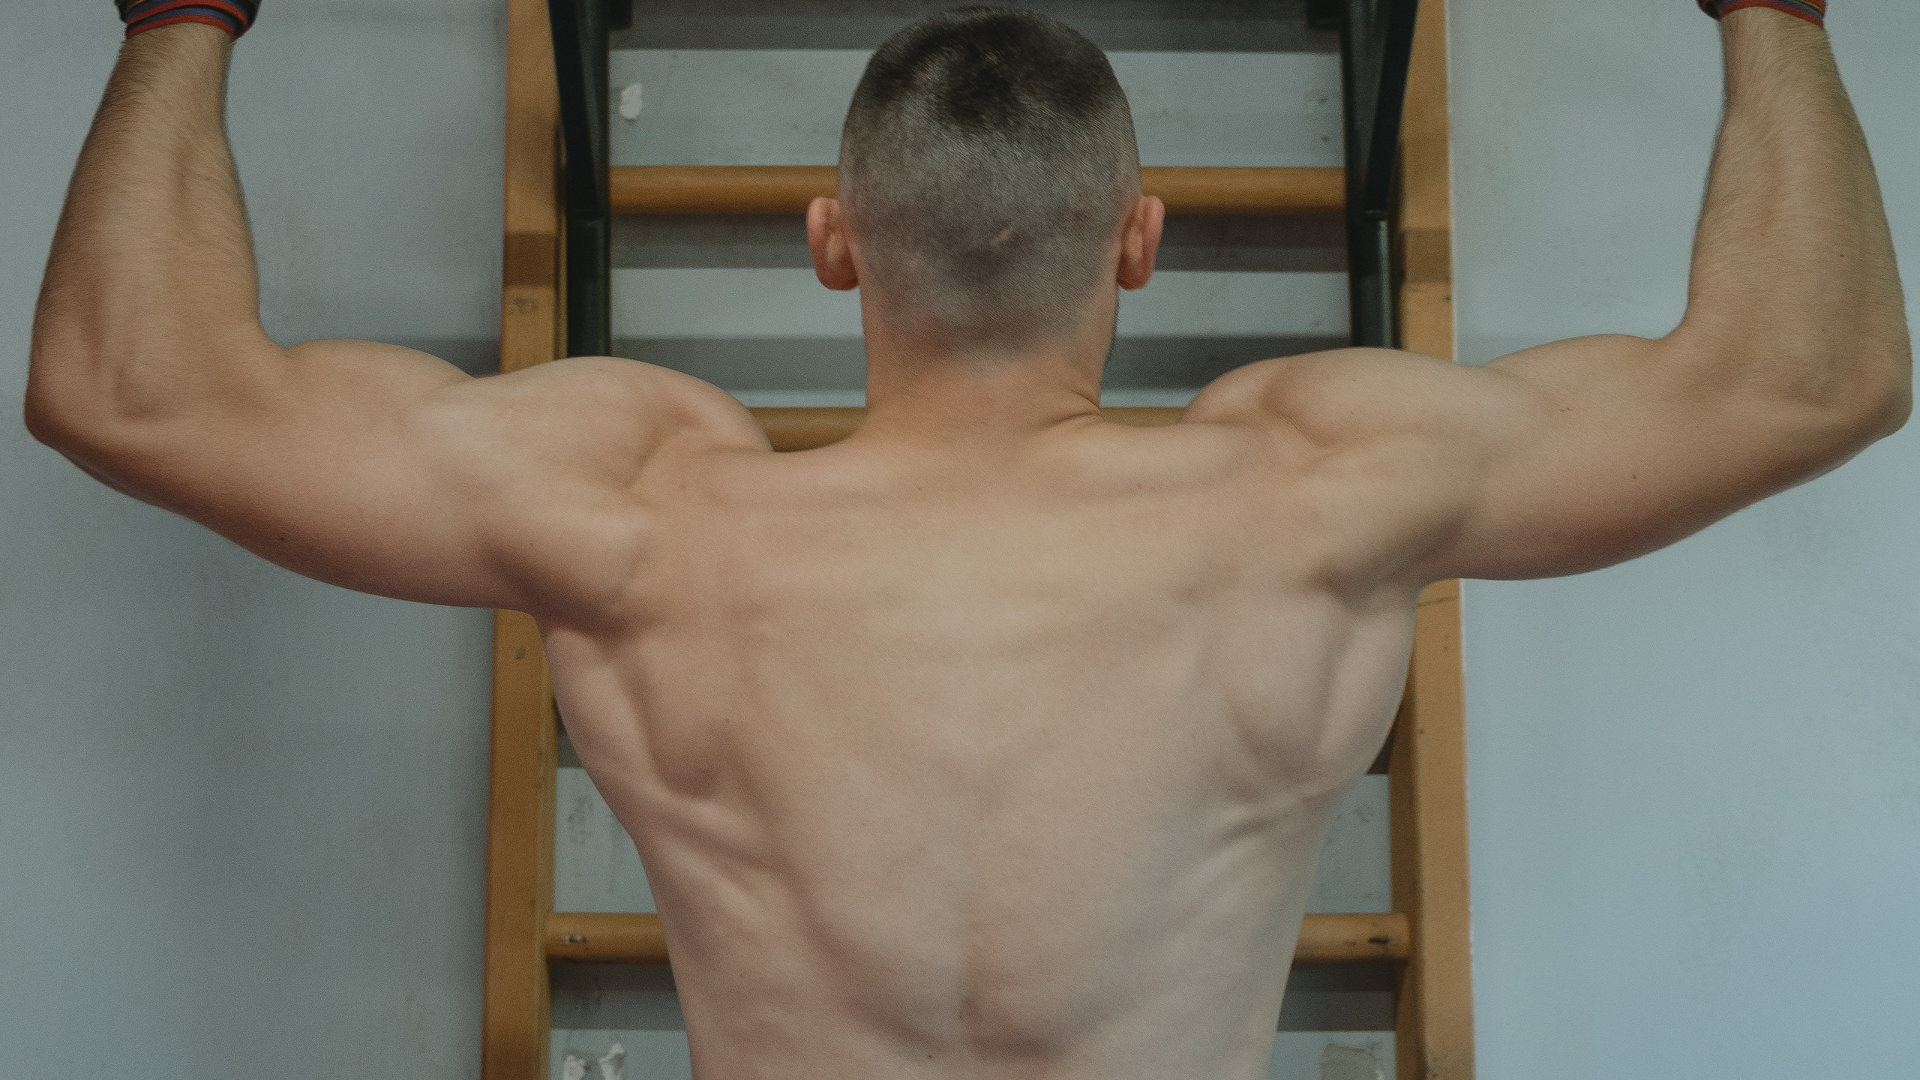 trapezius strengthening exercises without weights